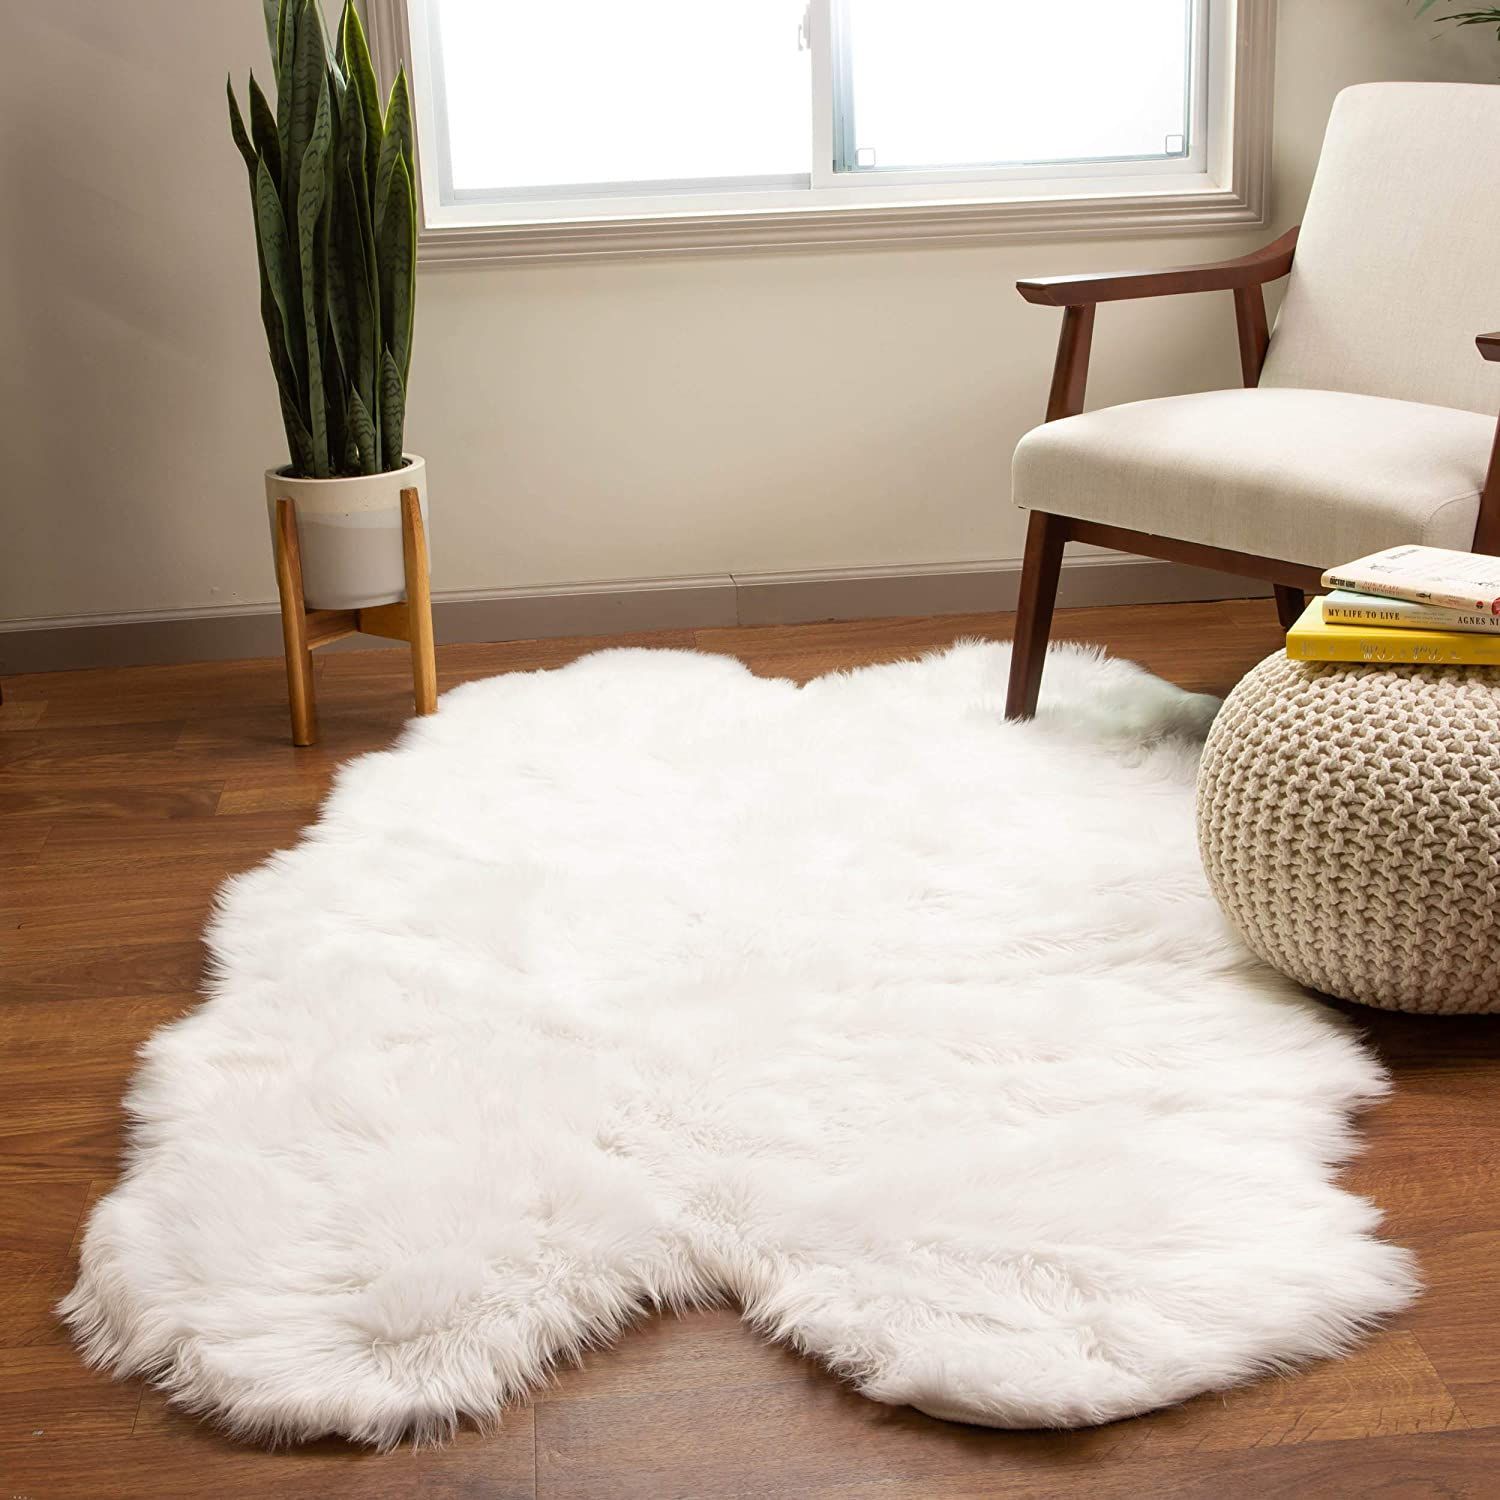 Soft Area Rugs To Make Your Home Cozy, Furry White Rug